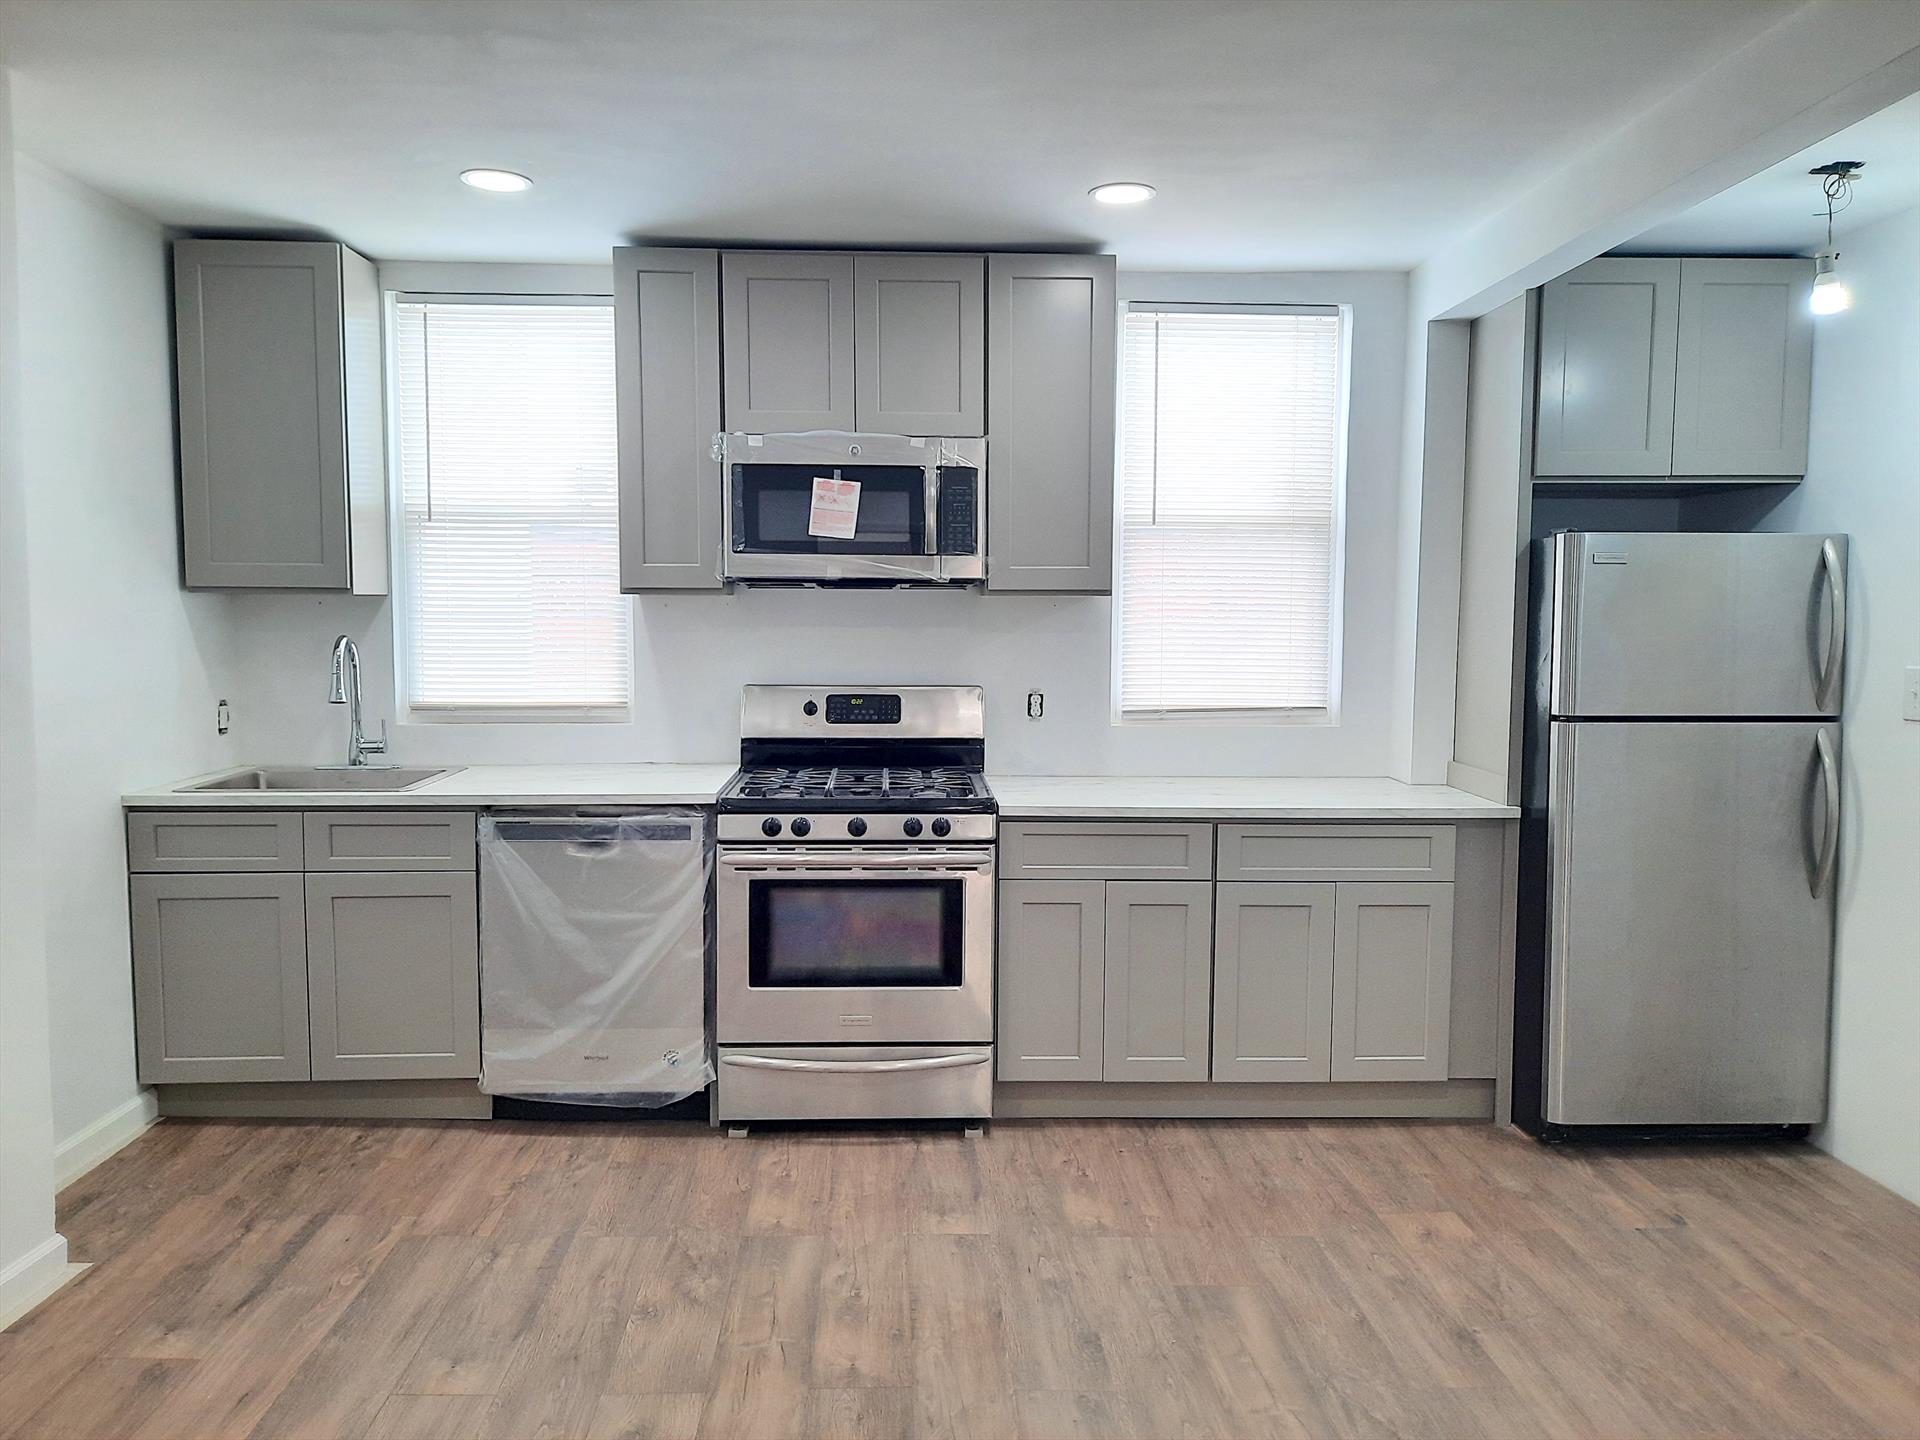 AS PER CURRENT TENANT NO SHOWINGS UNTIL AFTER SEPTEMBER 1st. Move into this recently renovated Union City 2 BR rental conveniently located on the Bergenline Avenue business district. Features: great natural light (6 windows), open modern kitchen with stainless steel refrigerator, gas stove, microwave, and dishwasher, living room (12.3' x 9'), 2 separate bedrooms (BR1: 12.3 x 9.3' and BR 2: 13' x 9'), ample closets, full bathroom with bathtub, wood laminate floors, recessed lighting, top floor of a 3rd floor walk up, close to shopping, restaurants, parks, and public transportation to NYC and the Journal Square Path. Water and sewer are included. The tenant pays for heat, hot water, gas, and electricity. To make this great apartment yours: $1850 (first months rent), $2775 (security deposit), $1850 (broker fee), $50 credit check per adult tenant.